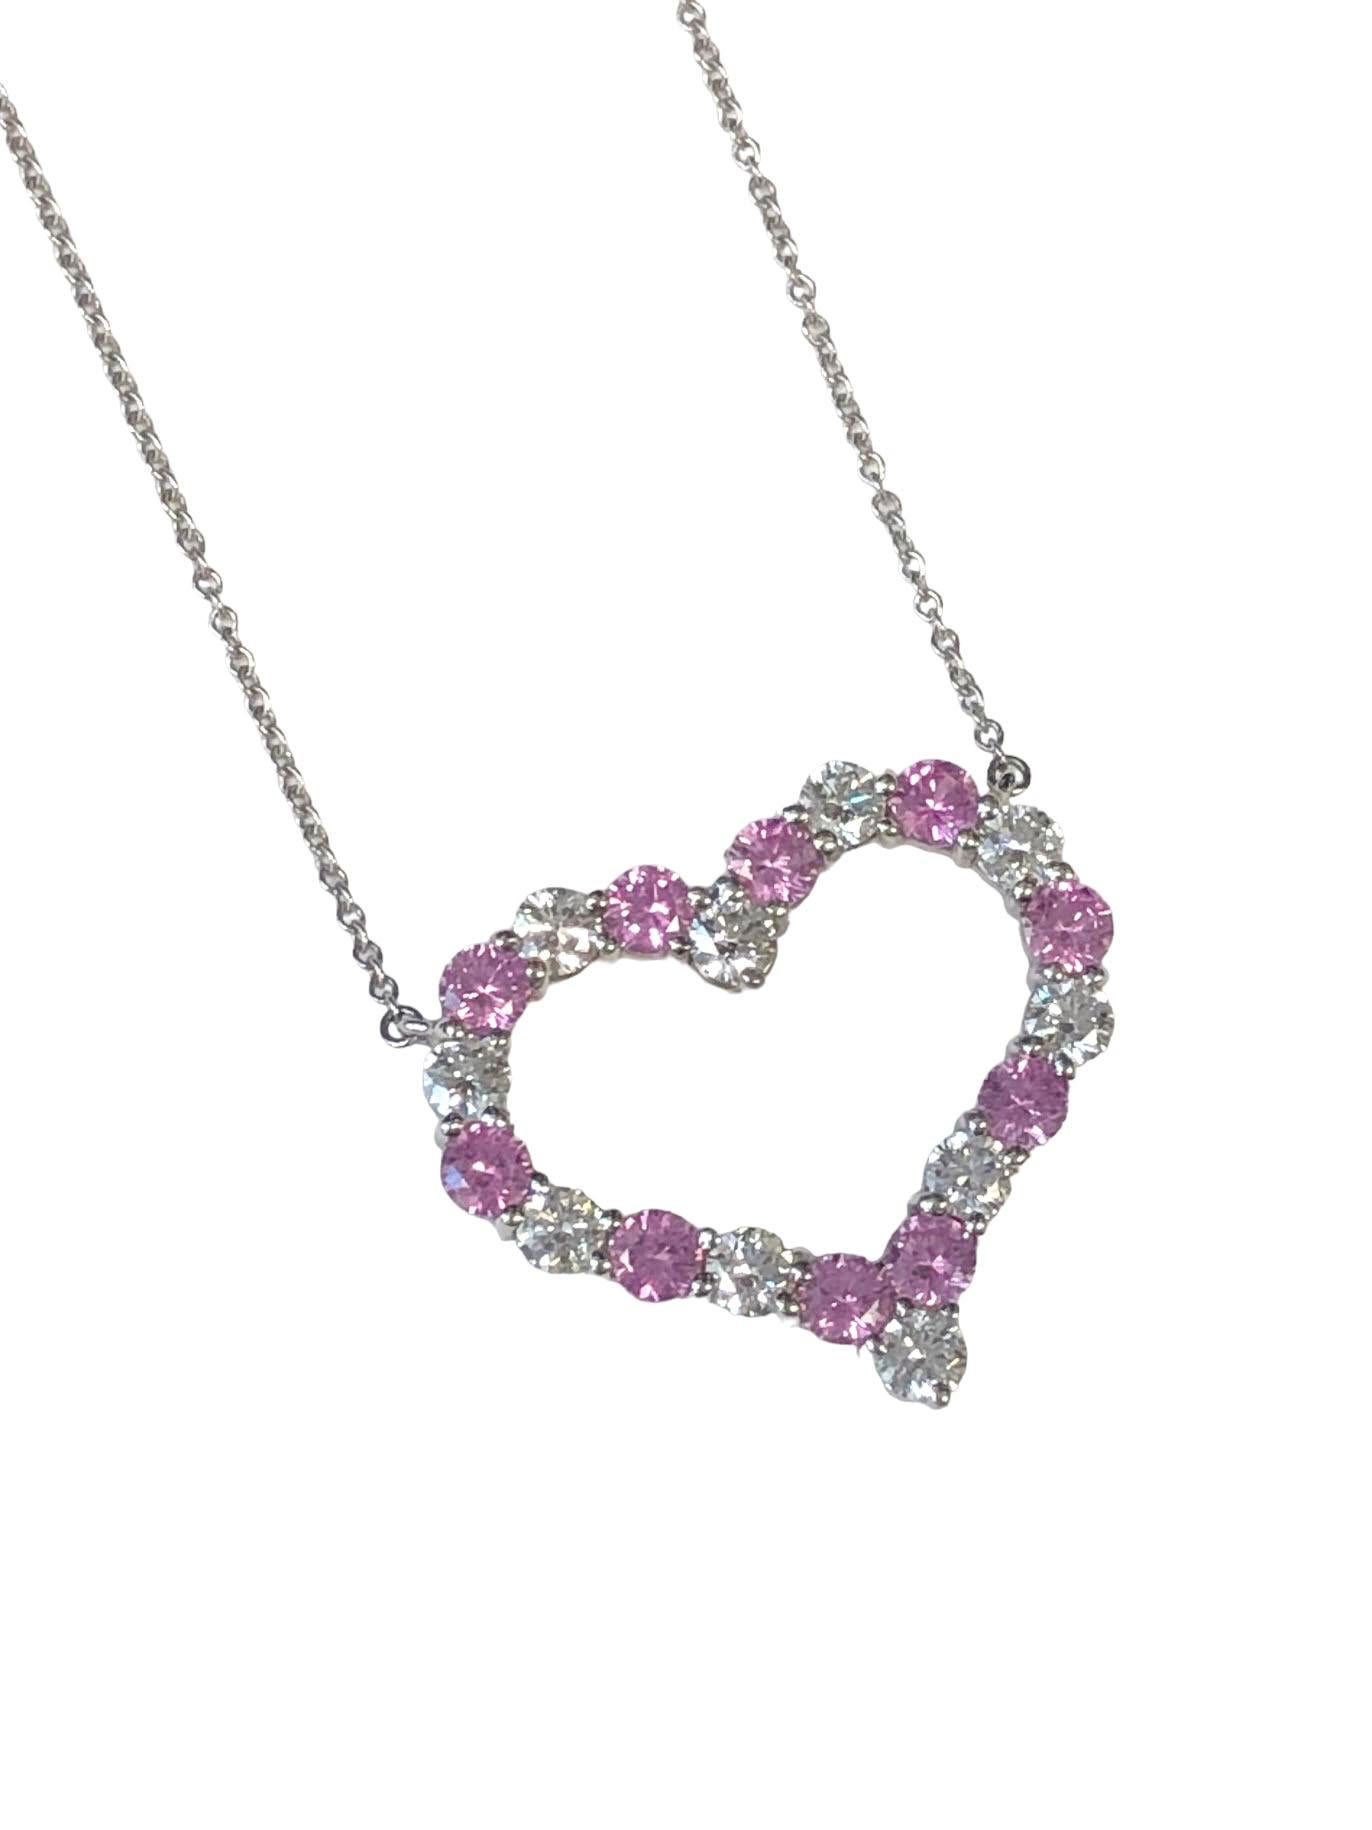 Round Cut Tiffany & Co. Platinum Diamond and Pink Sapphire Open Heart Pendant Necklace For Sale